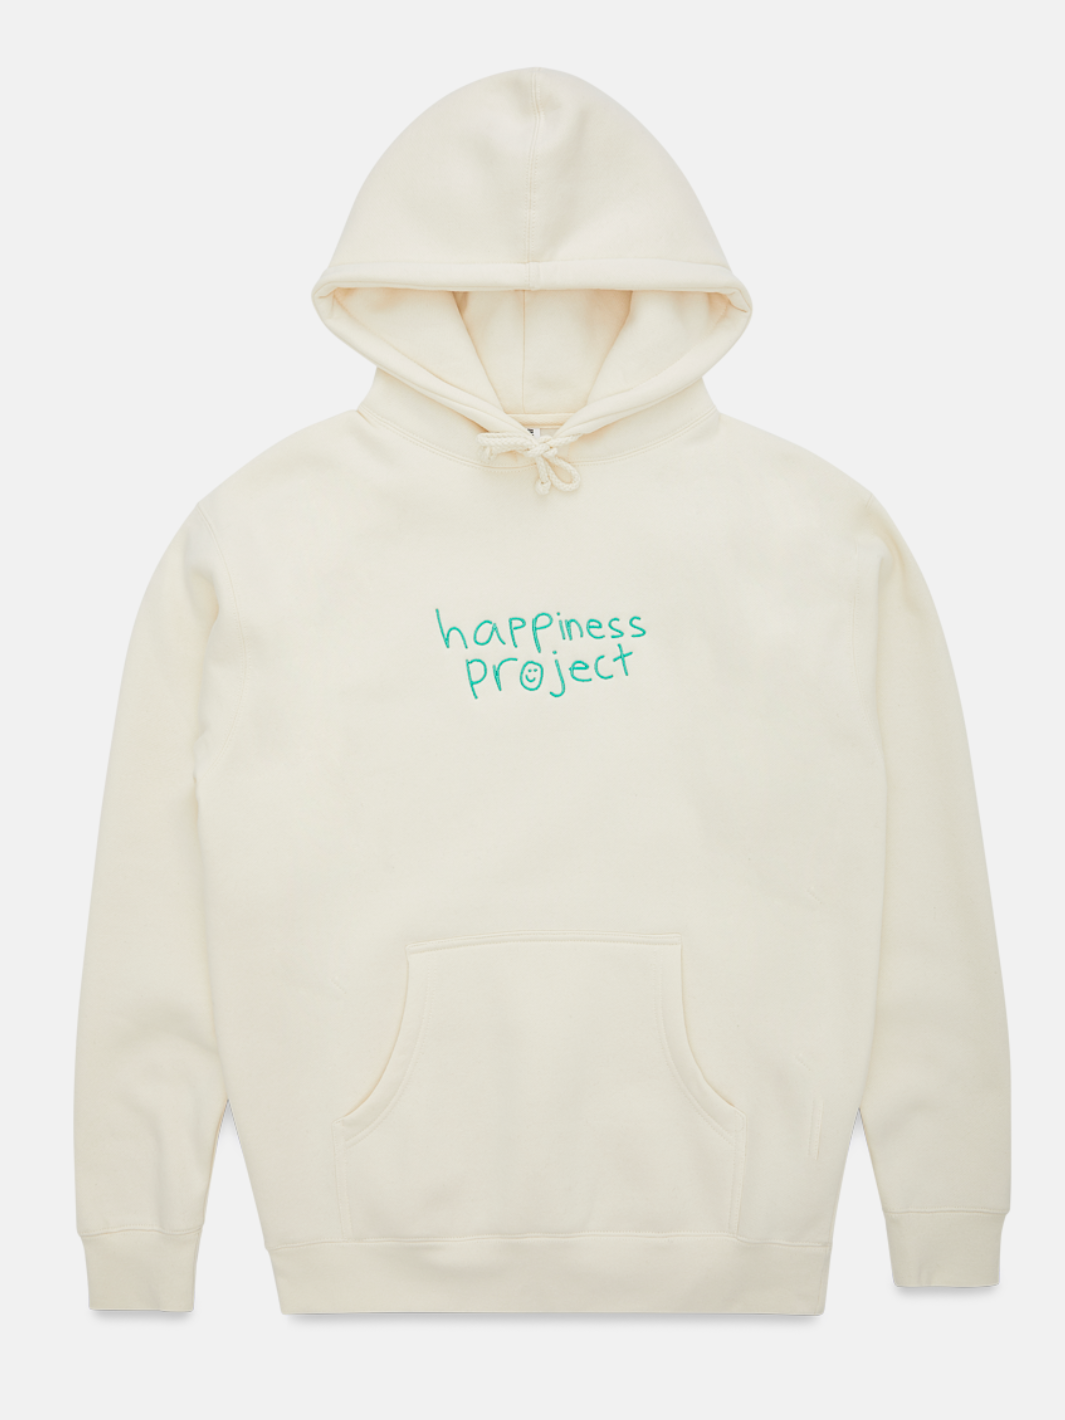 "Growth Is A Process" Hoodie